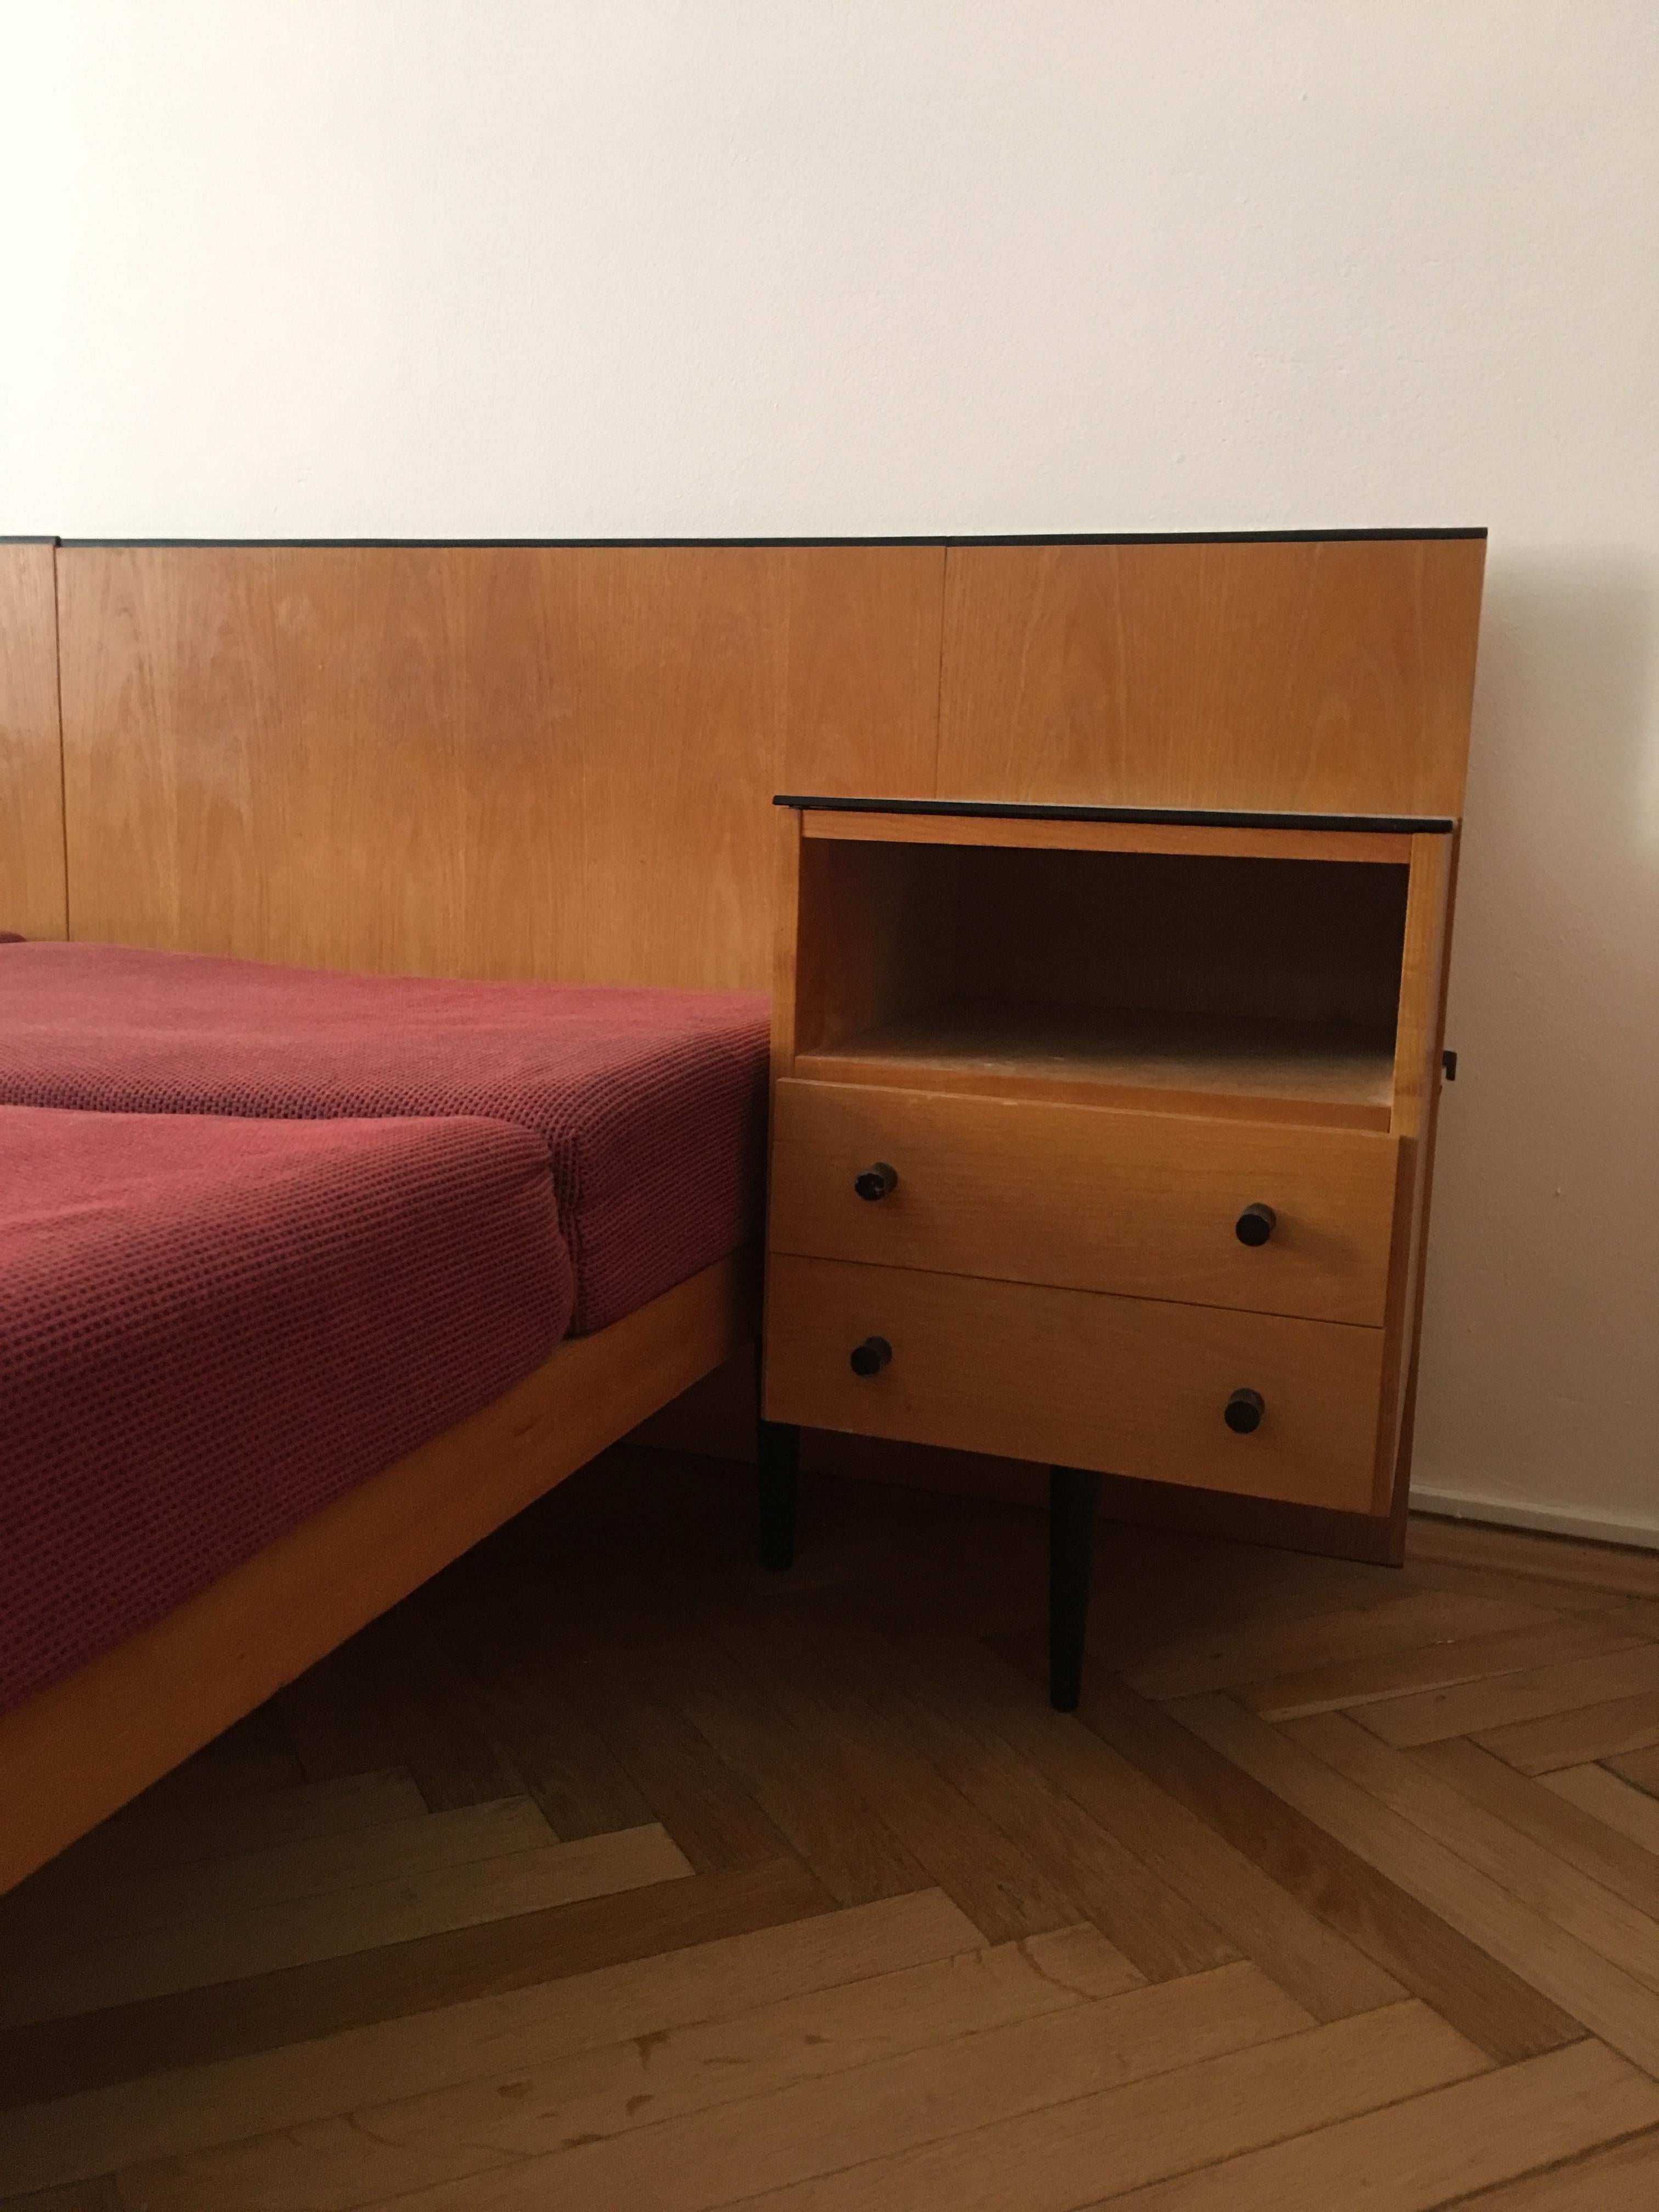 Double Bed with Nightstands by Mojmir Pozar for Up Zavody, 1960s (Tschechisch)